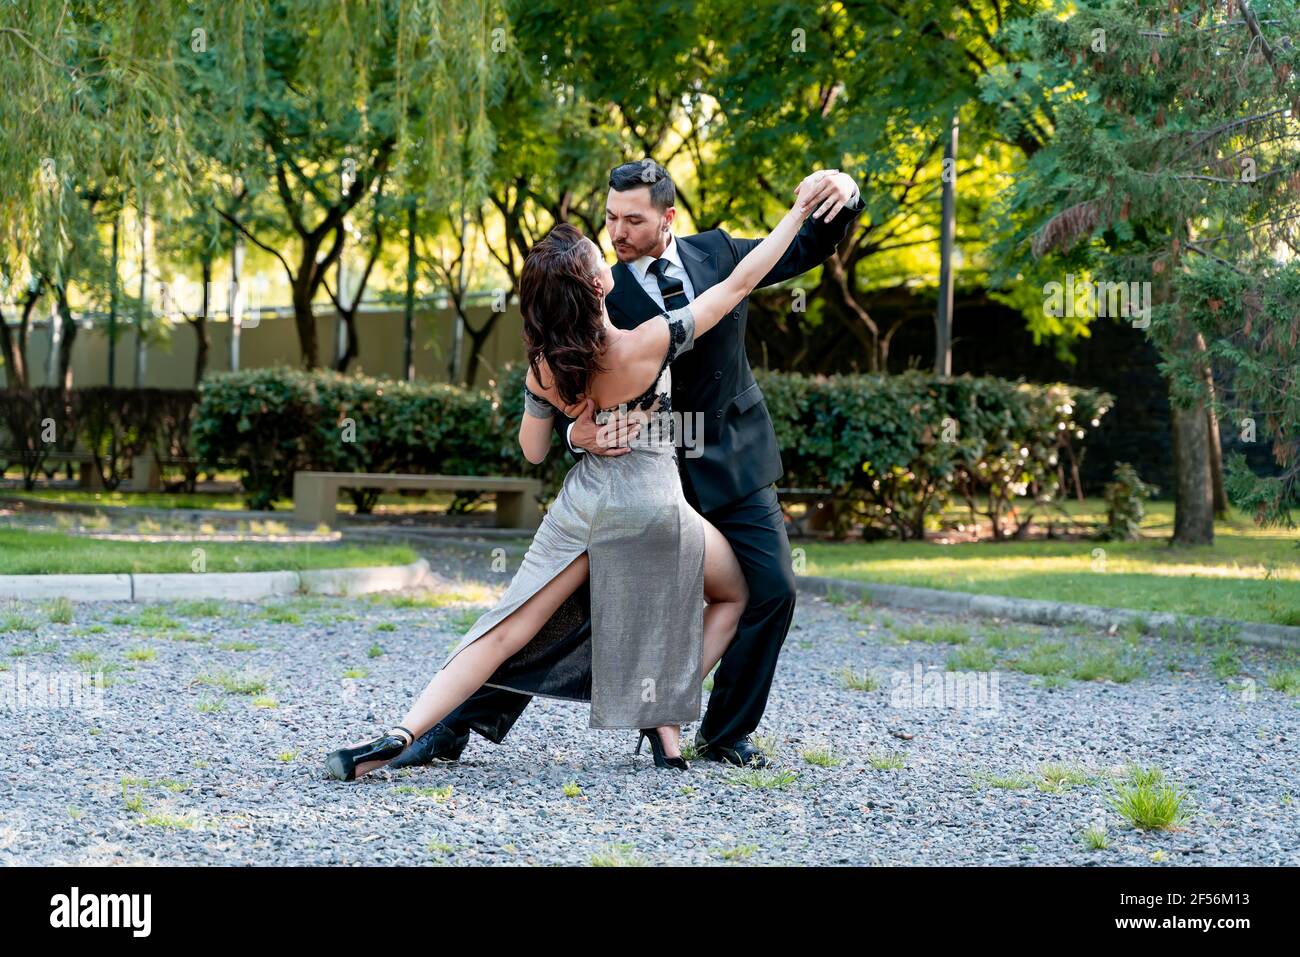 Flexible female practicing with male dancer in public park Stock Photo